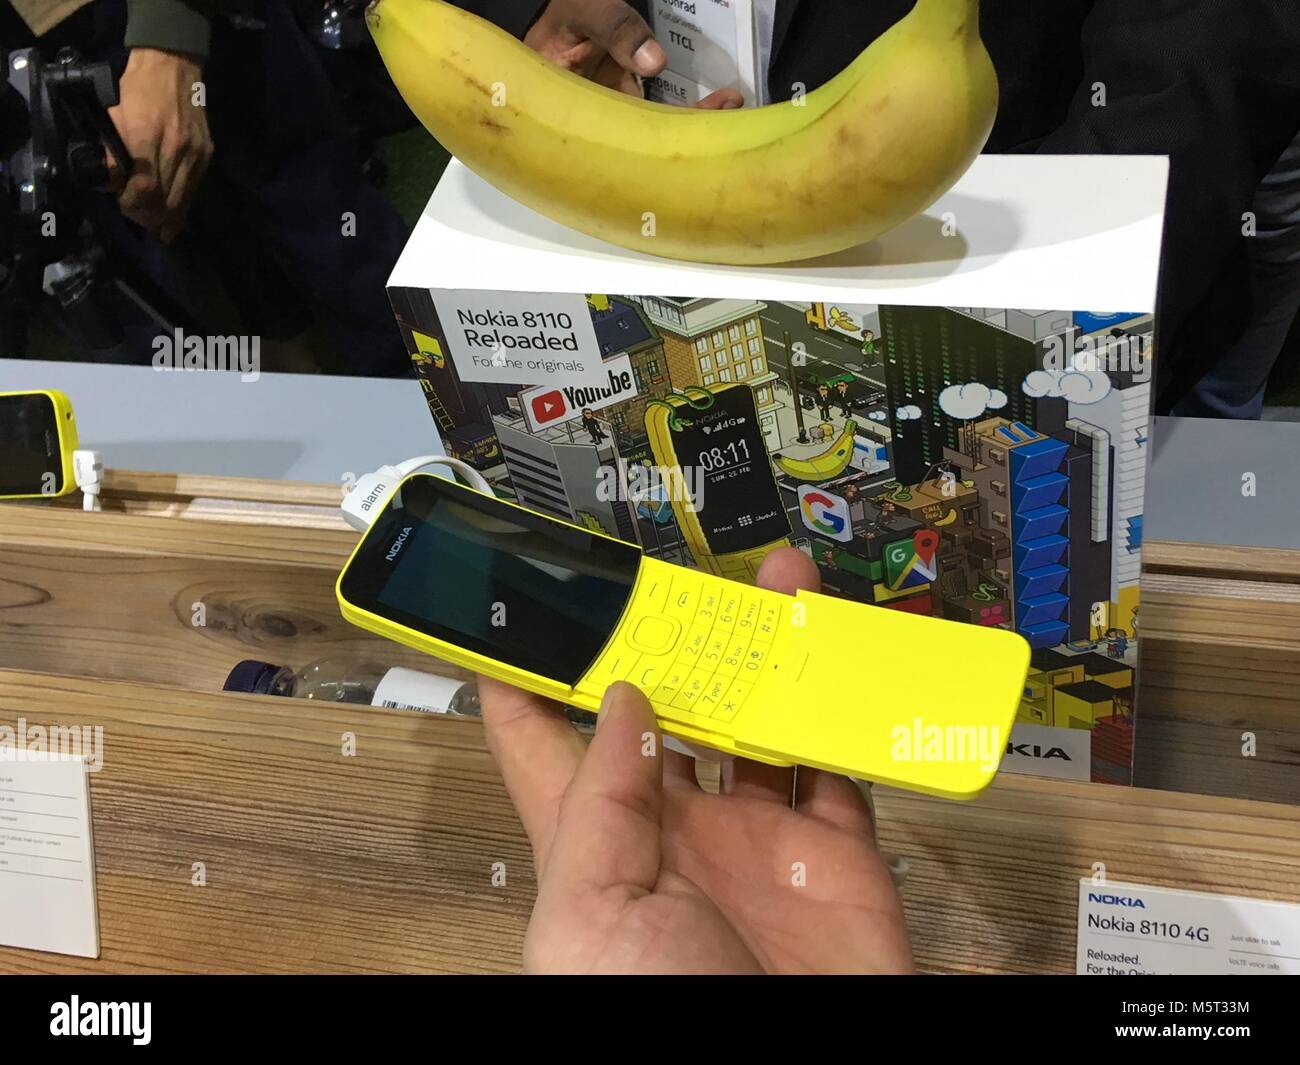 Barcelona, Spain. 26th Feb, 2018. A mobile phone Nokia 8110 in Banana Yellow color by HMD Global company is seen during the 2018 Mobile World Congress in Barcelona, Spain, on February 26, 2018. Credit: Jan Sadilek/CTK Photo/Alamy Live News Stock Photo